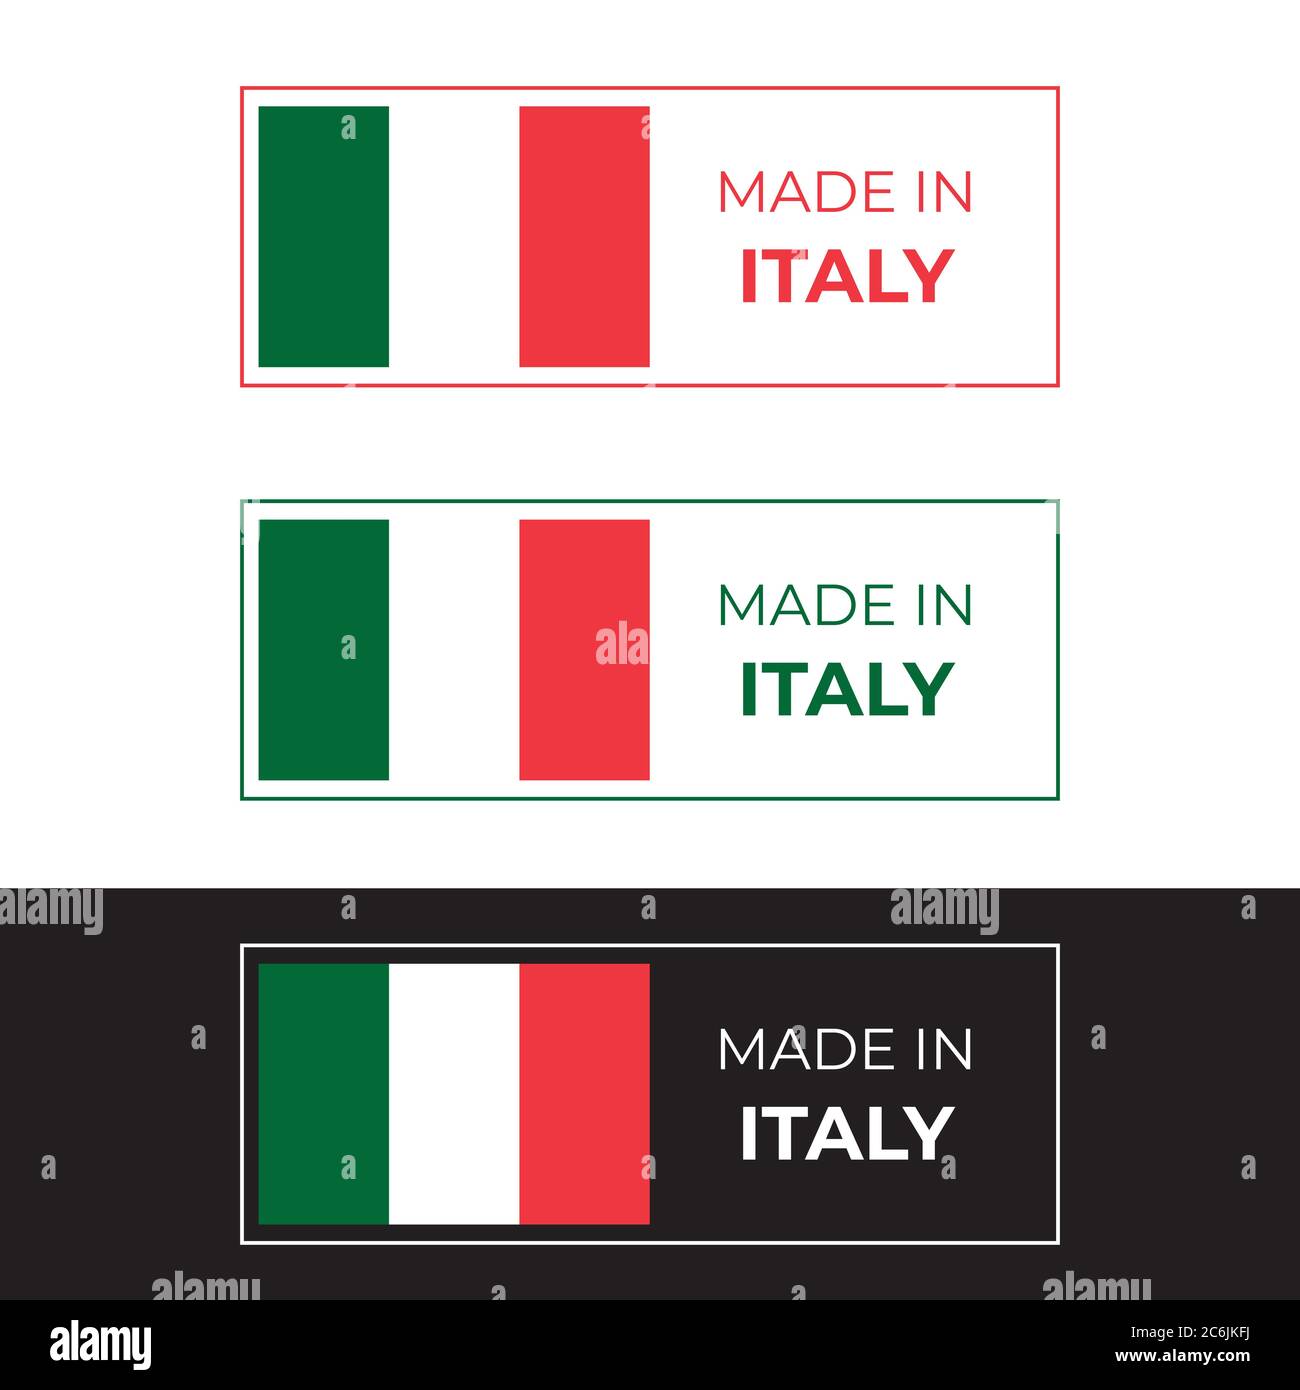 Made in Italy product label vector illustration design with banner  background element based on Italian country red and green national flag  Stock Vector Image & Art - Alamy